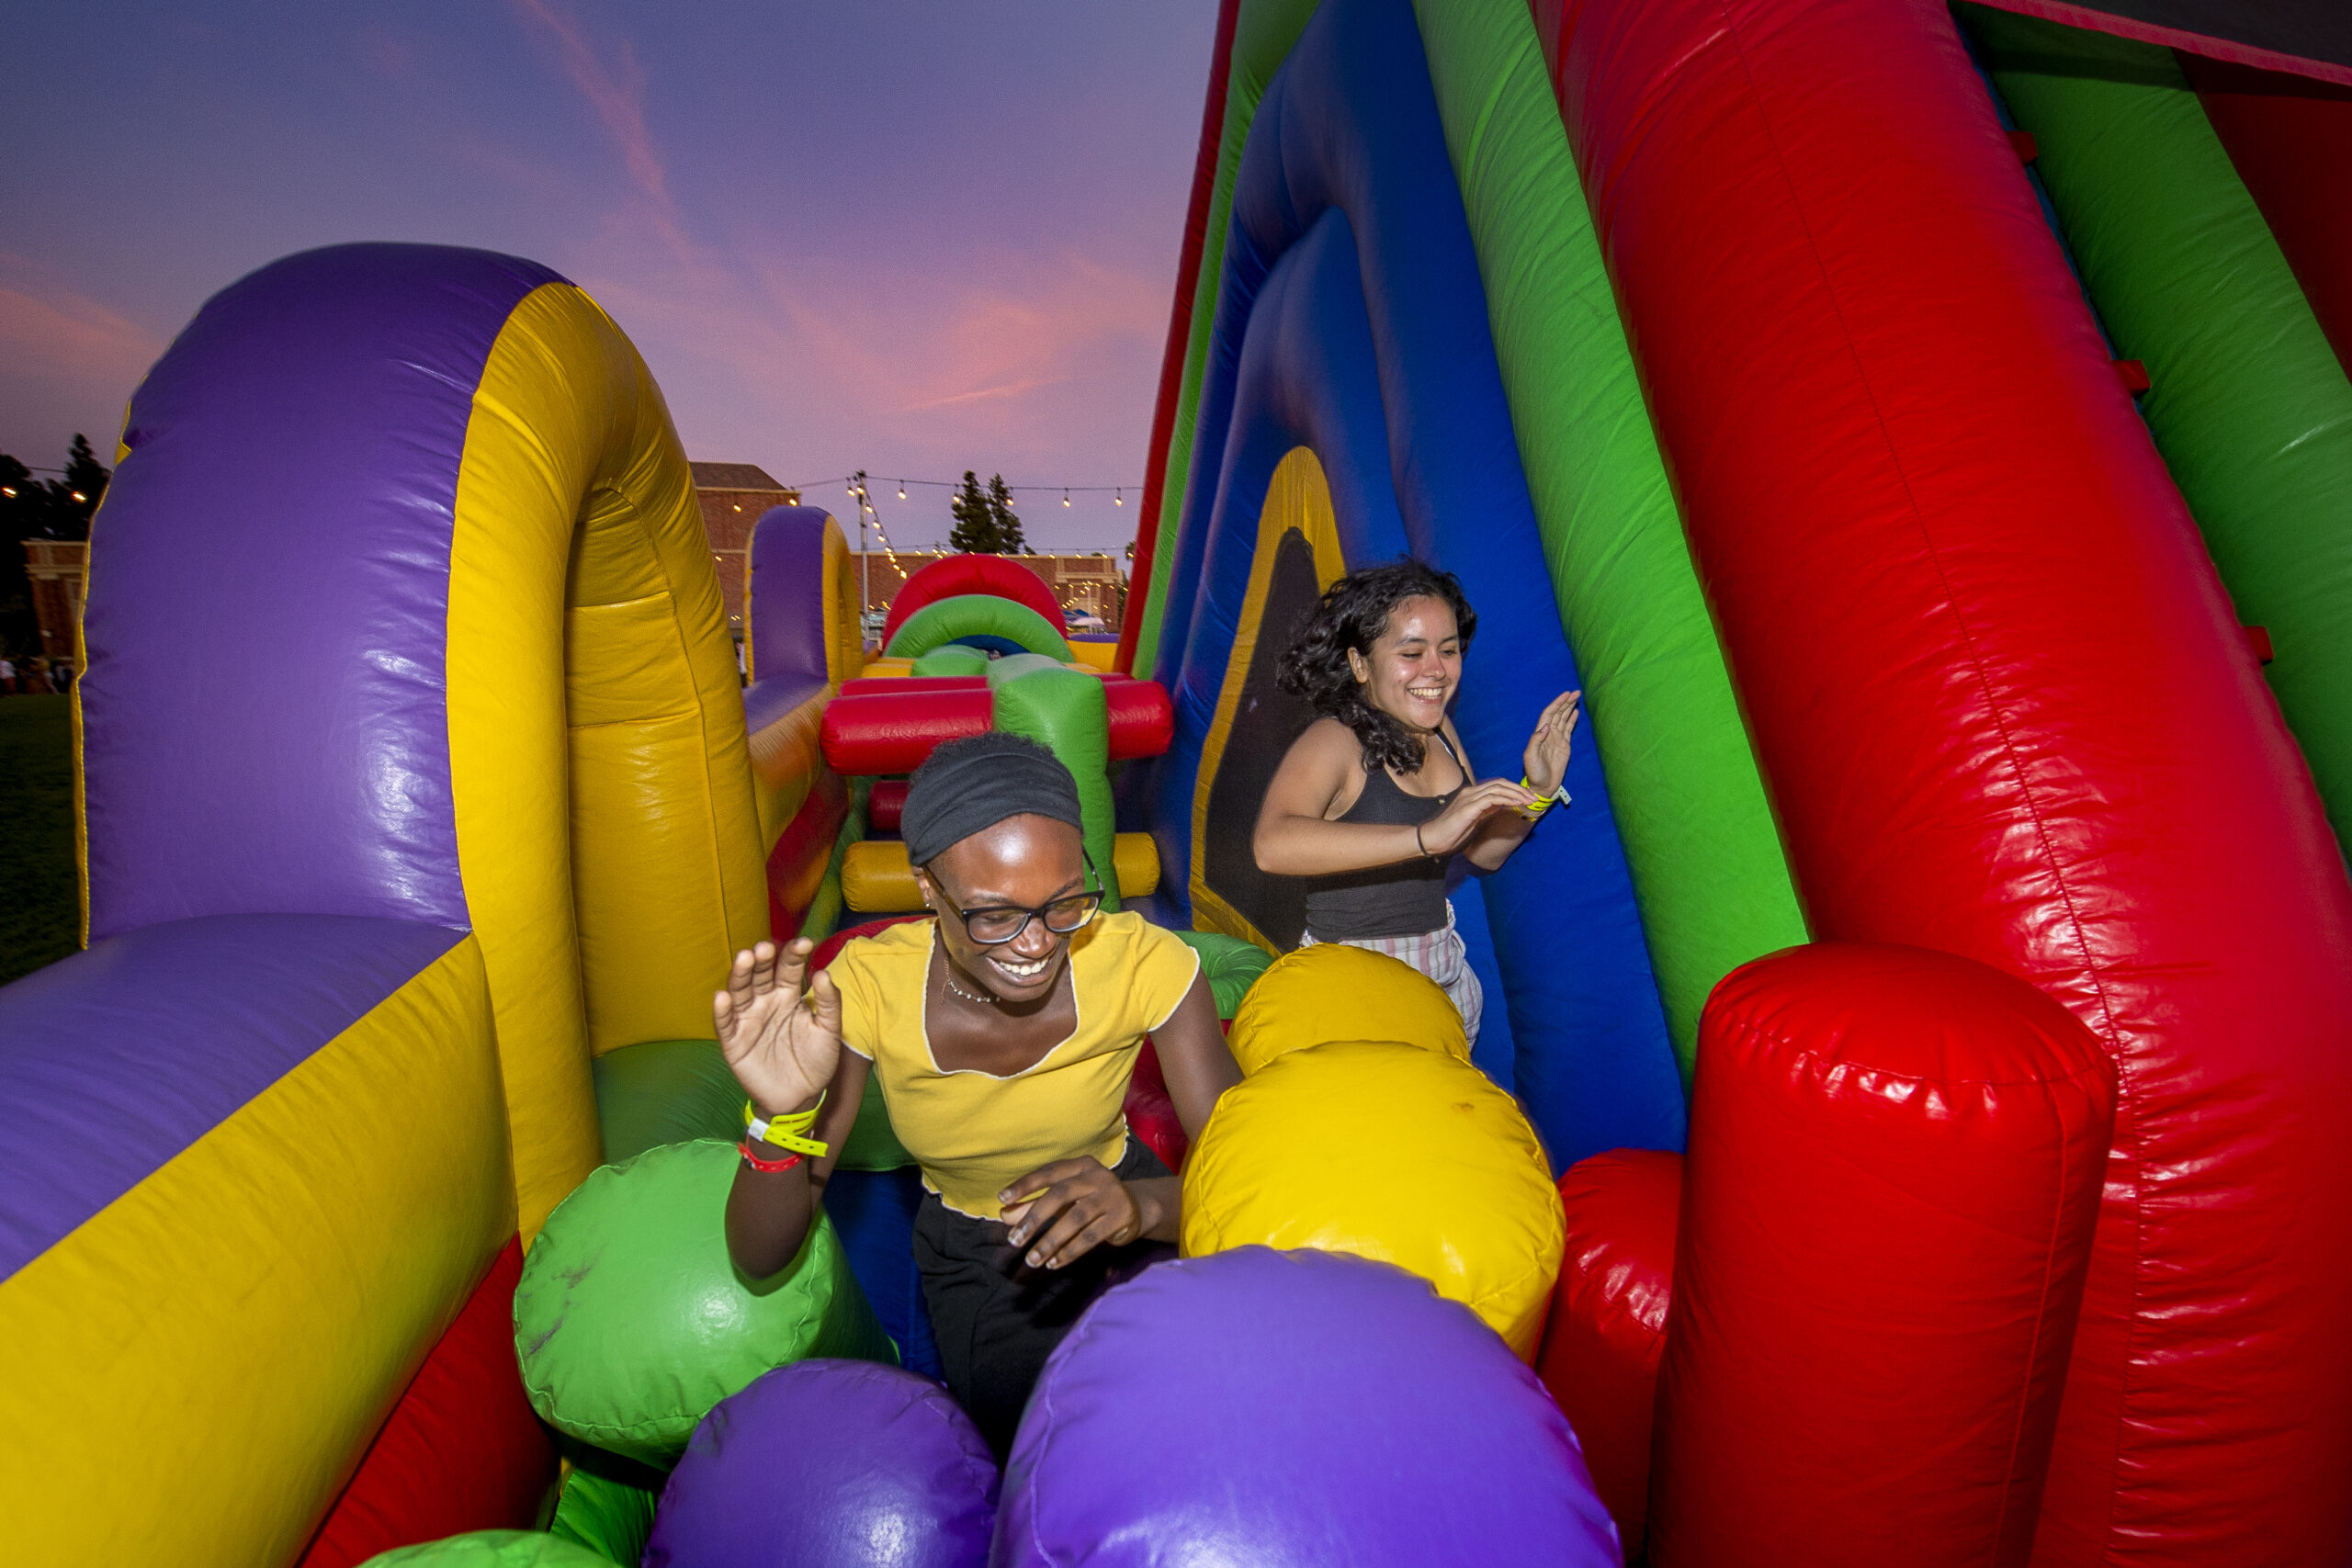 Residential college welcome festival, August 23, 2019. (Photo/Gus Ruelas)